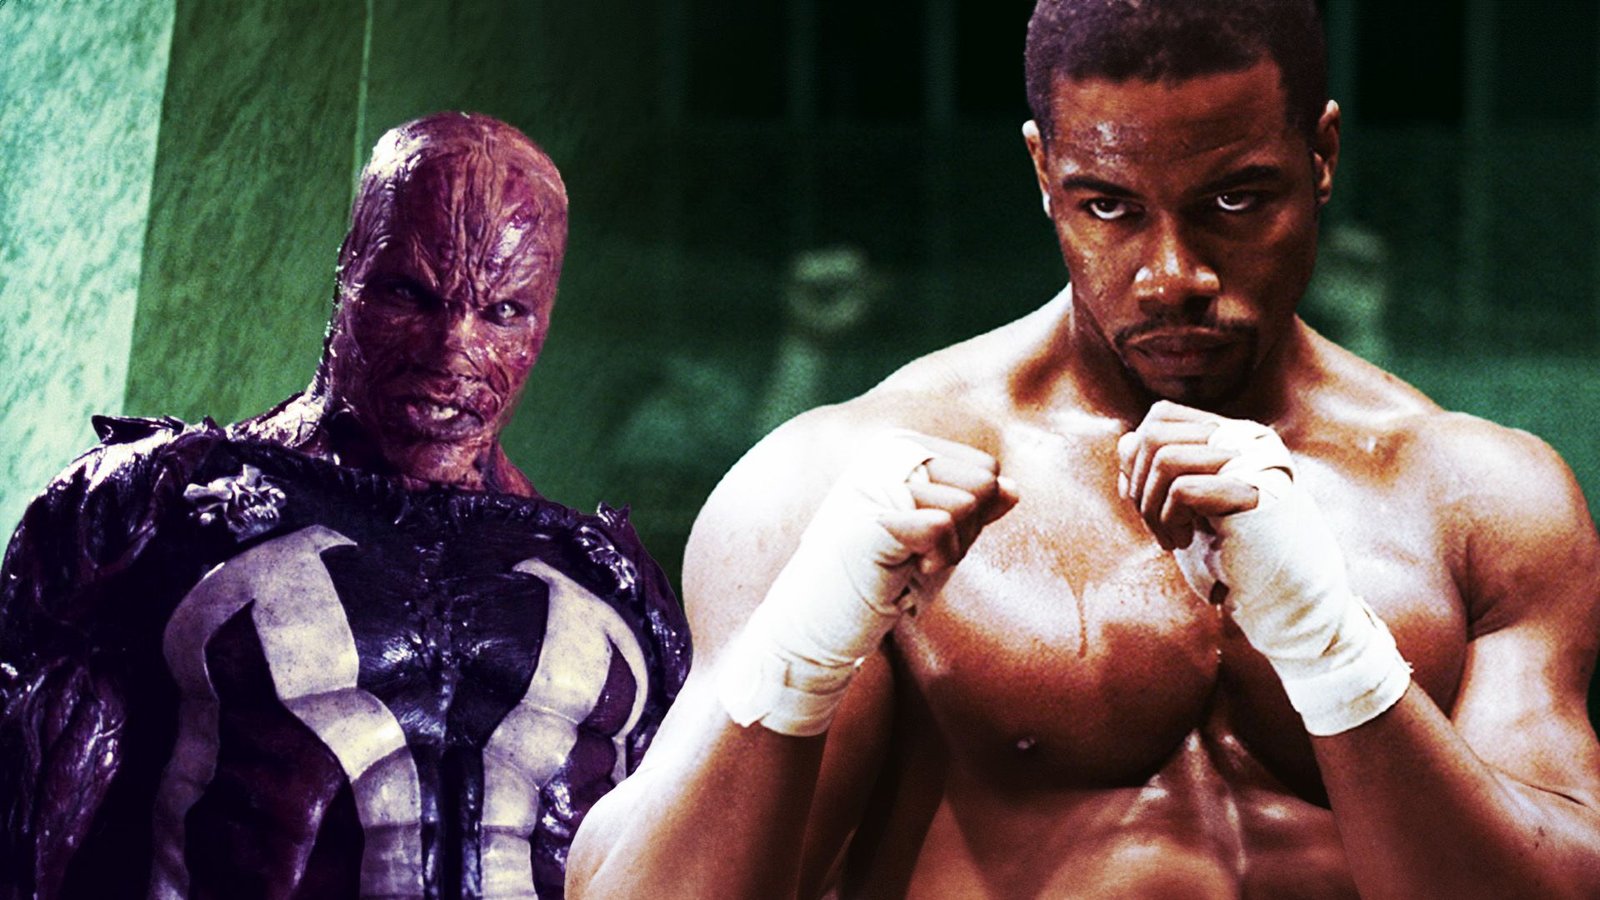 Is Michael Jai White a Real Martial Aritst? His Movies Make It Seem So